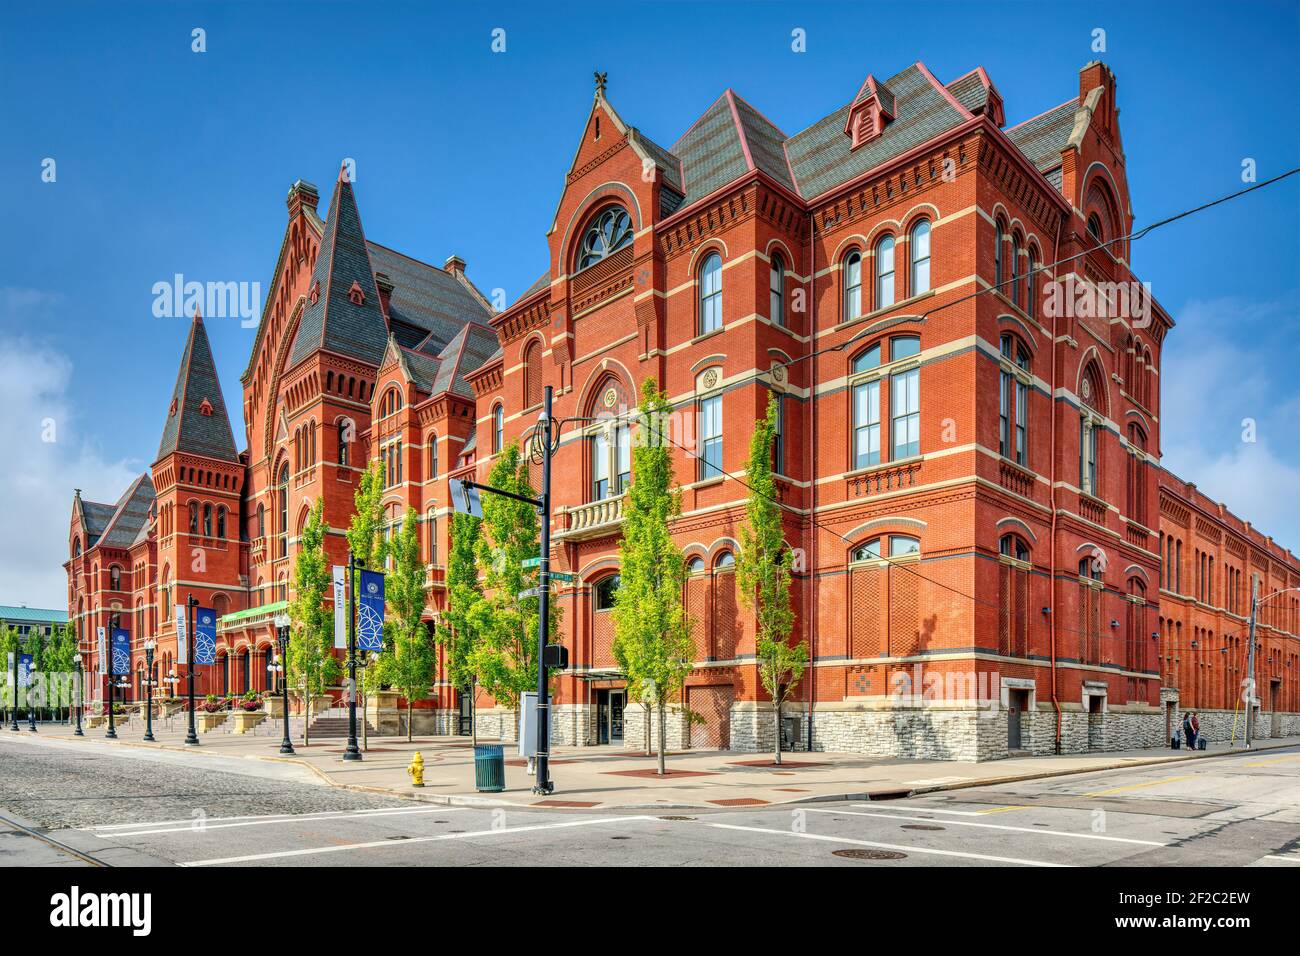 The landmark Cincinnati Music Hall is located in Cincy's Over-the-Rhine section. The performing arts center faces Washington Park on Elm Street. Stock Photo